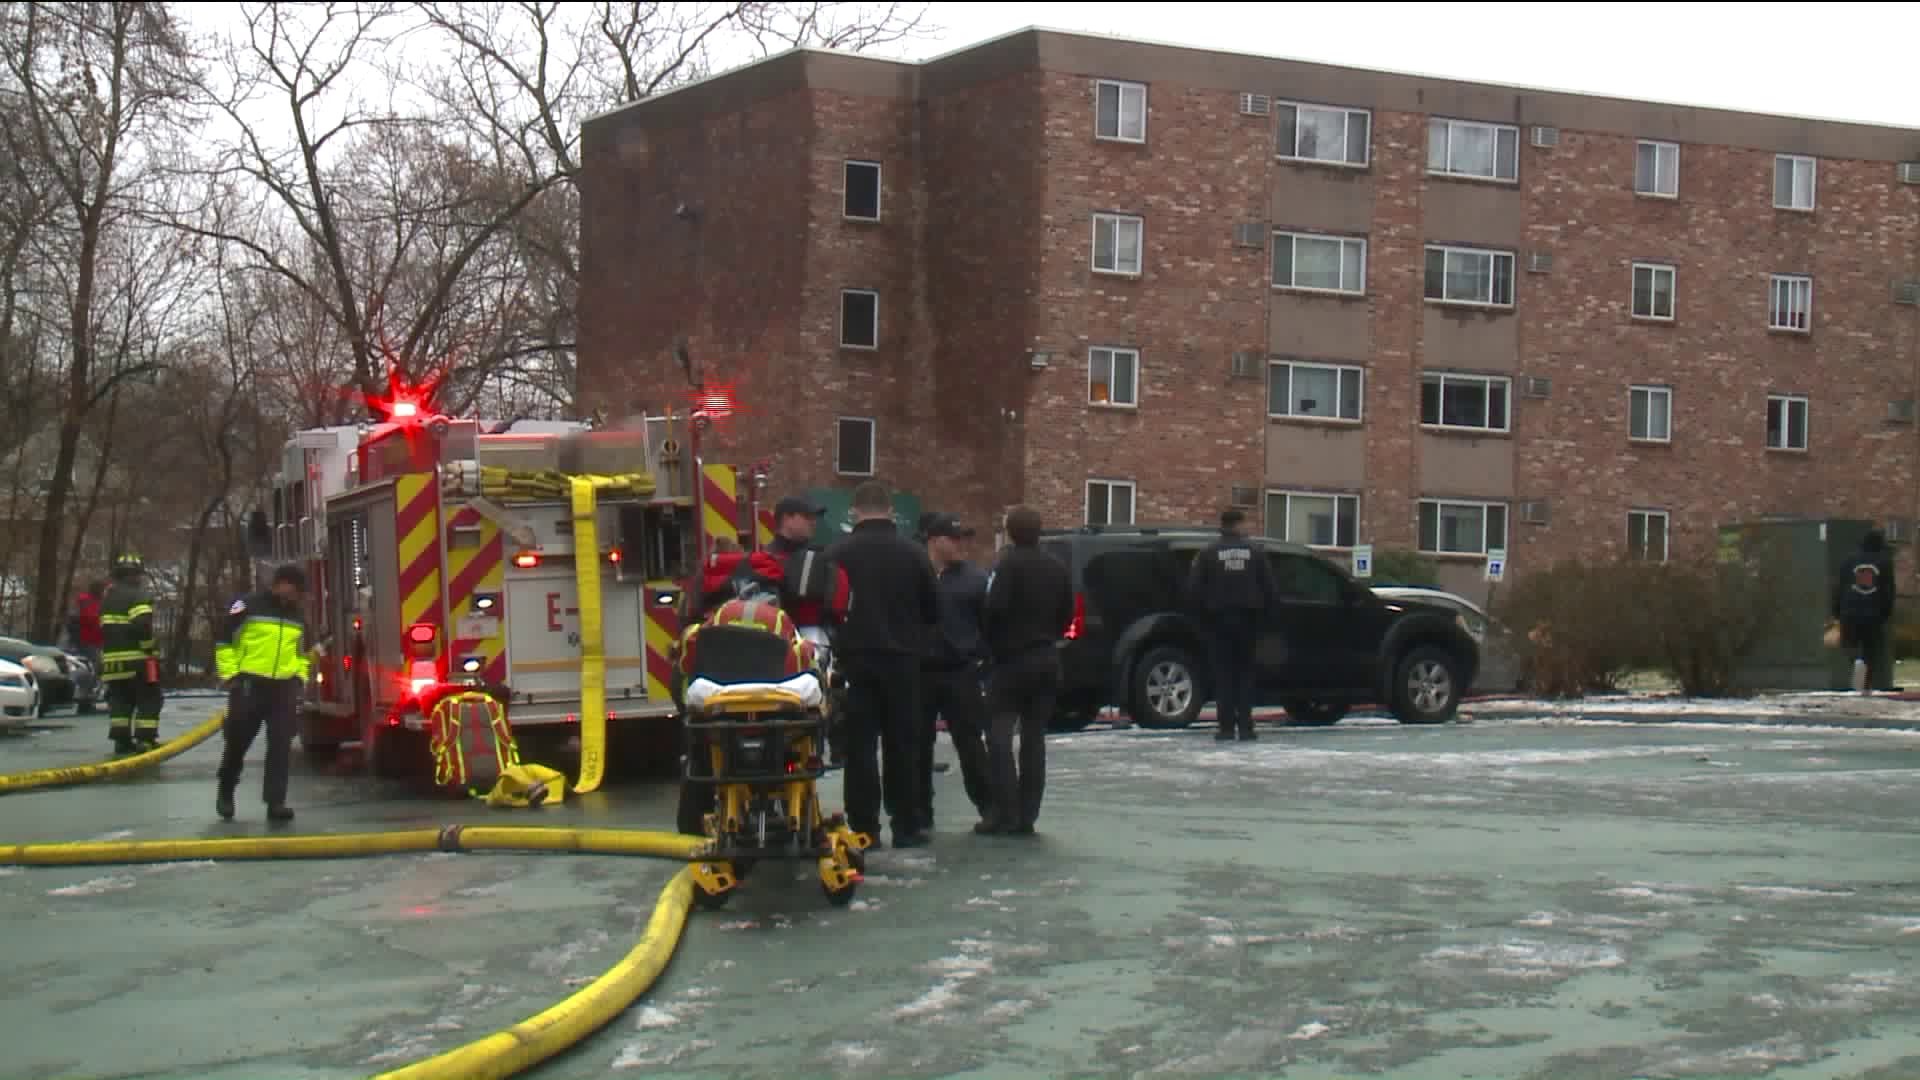 People jump from windows to flee Hartford apartment fire, 6 hospitalized